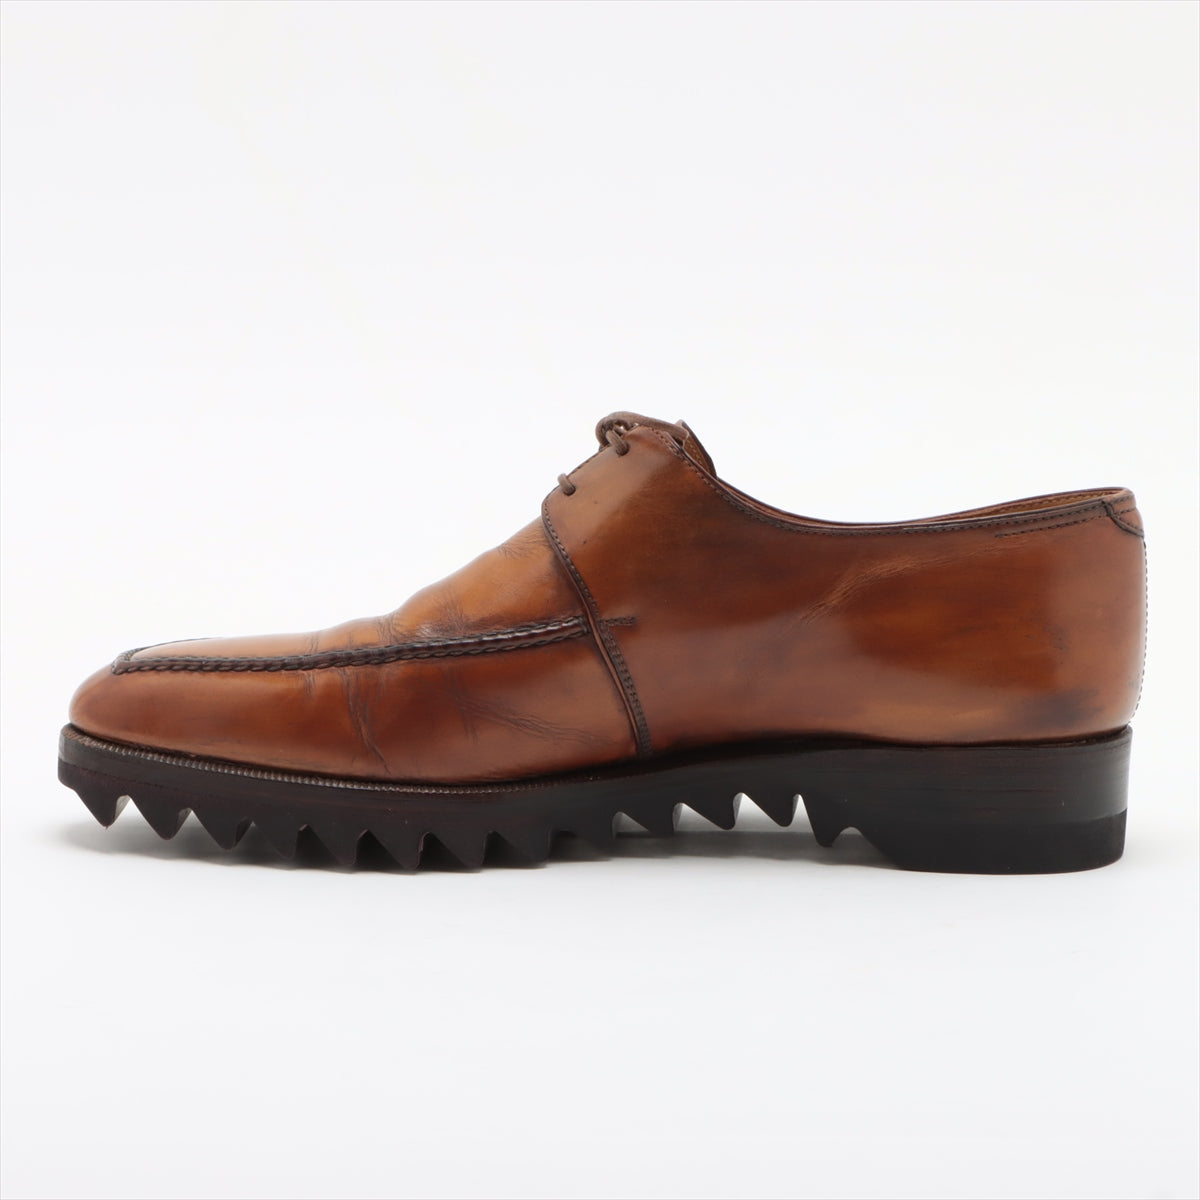 Berluti Leather Leather shoes 6 1/2 Men's Brown There are lift repairs There is a bag